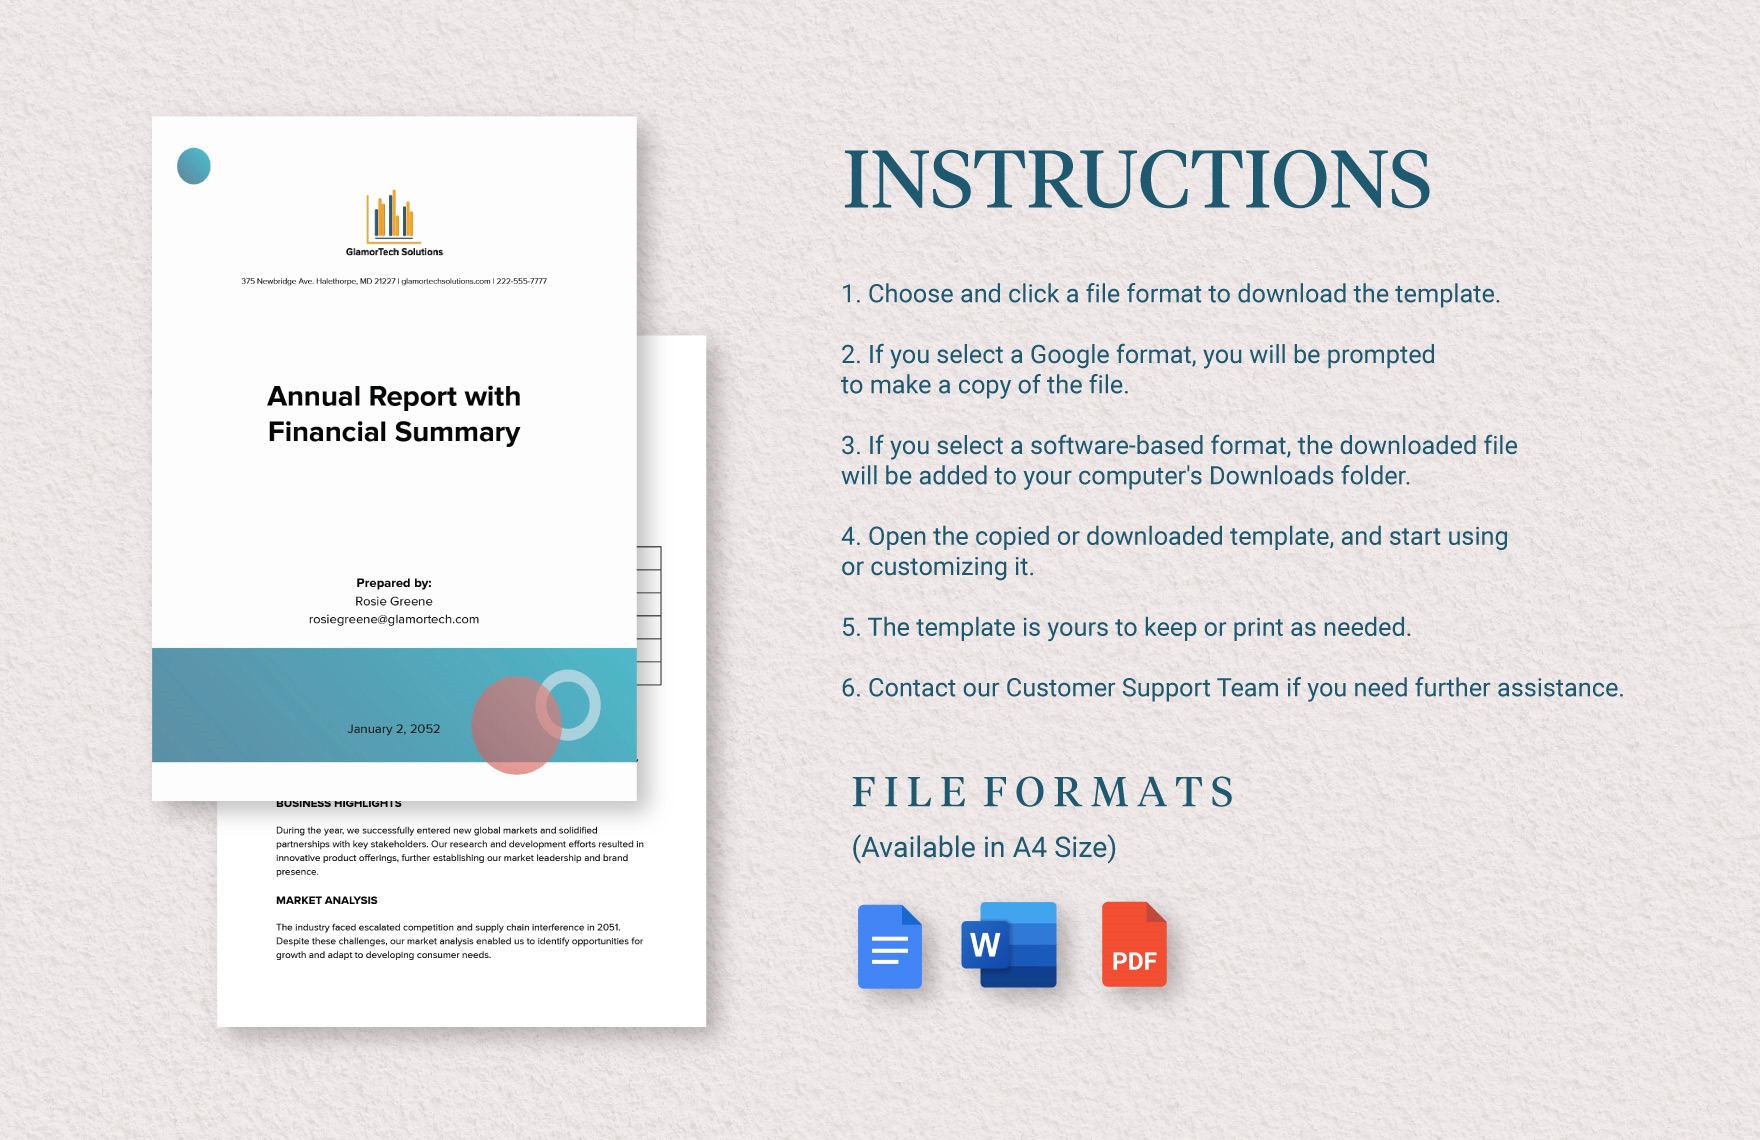 Annual Report with Financial Summary Template